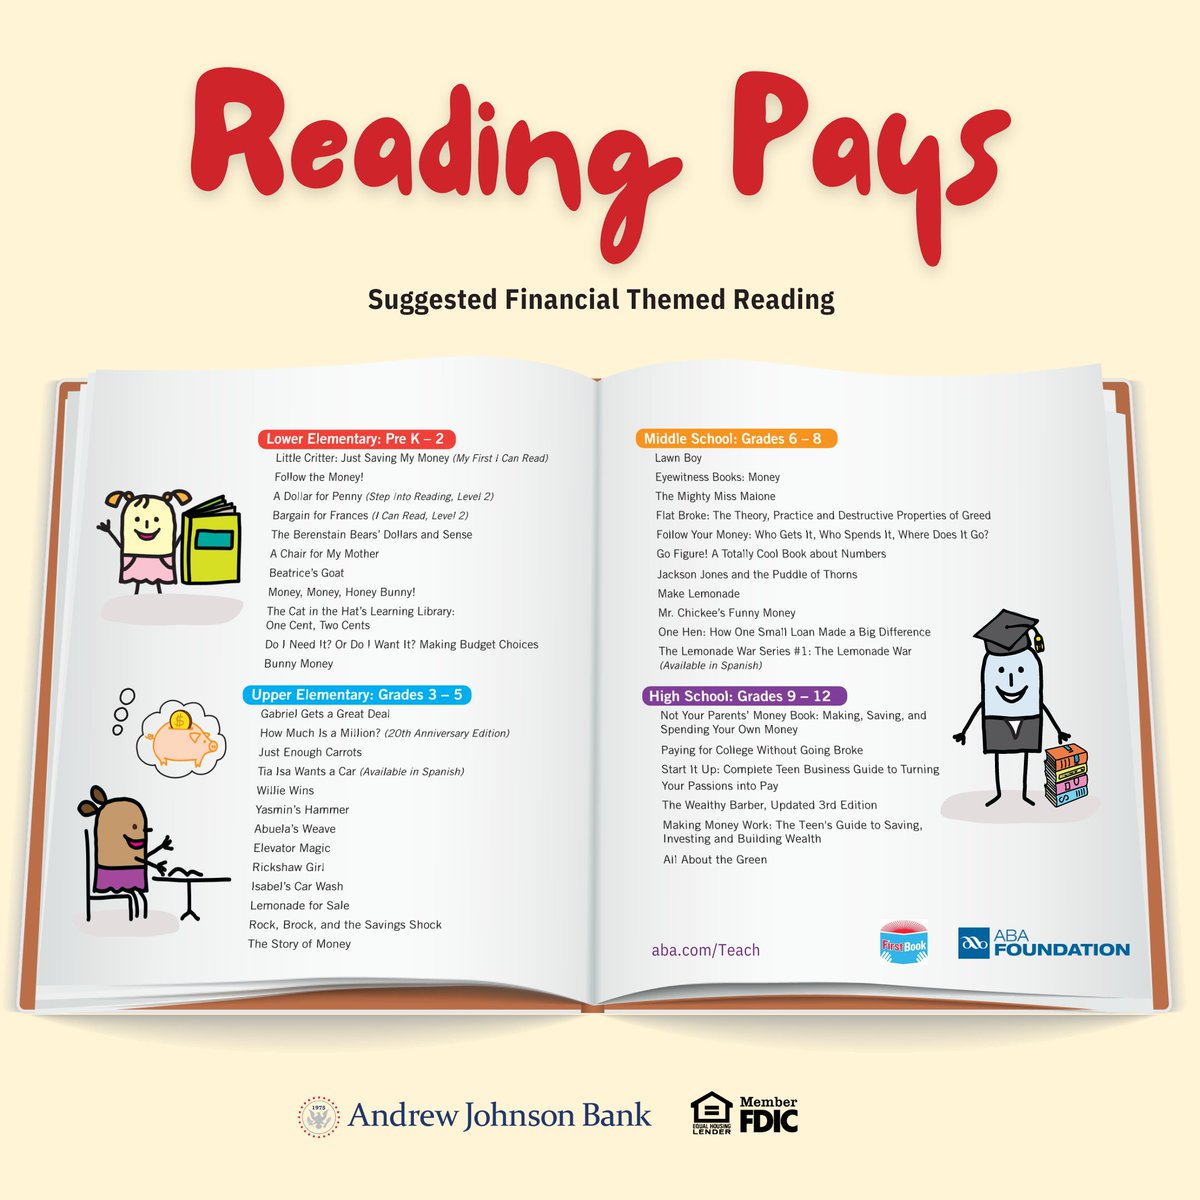 The American Bankers Association Foundation recommends the following book titles to inspire students of all ages to become strong readers and smart money managers.

Member FDIC | AJBank.com | #banklocal #teachchildrentosave